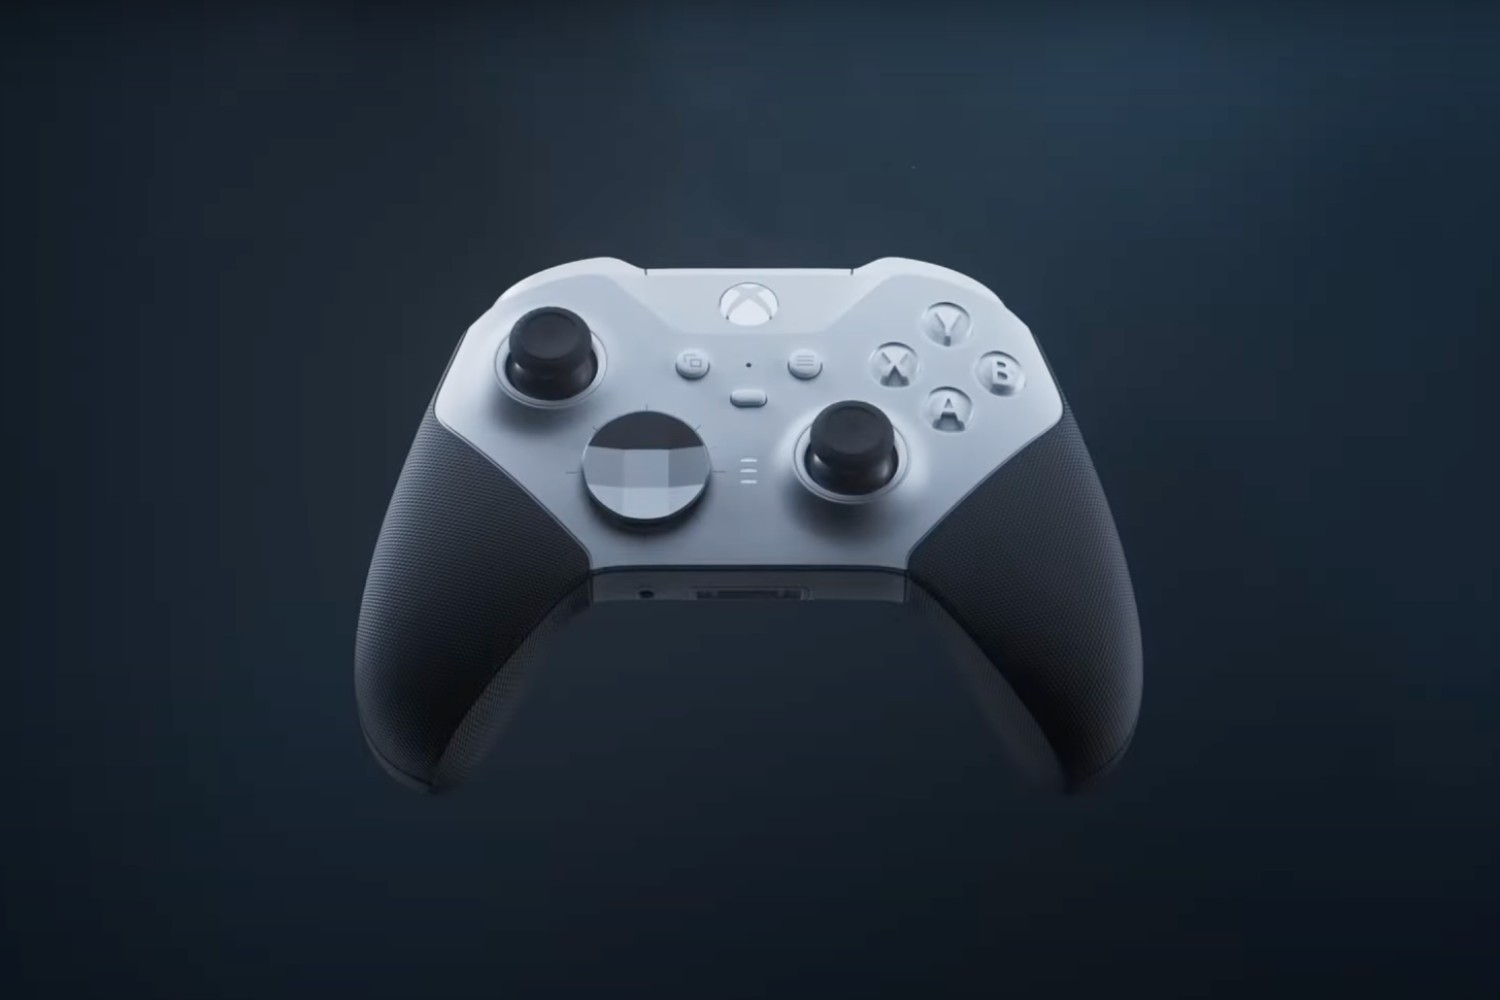 a controller is The edition | Core Xbox Digital best Trends getting cheaper